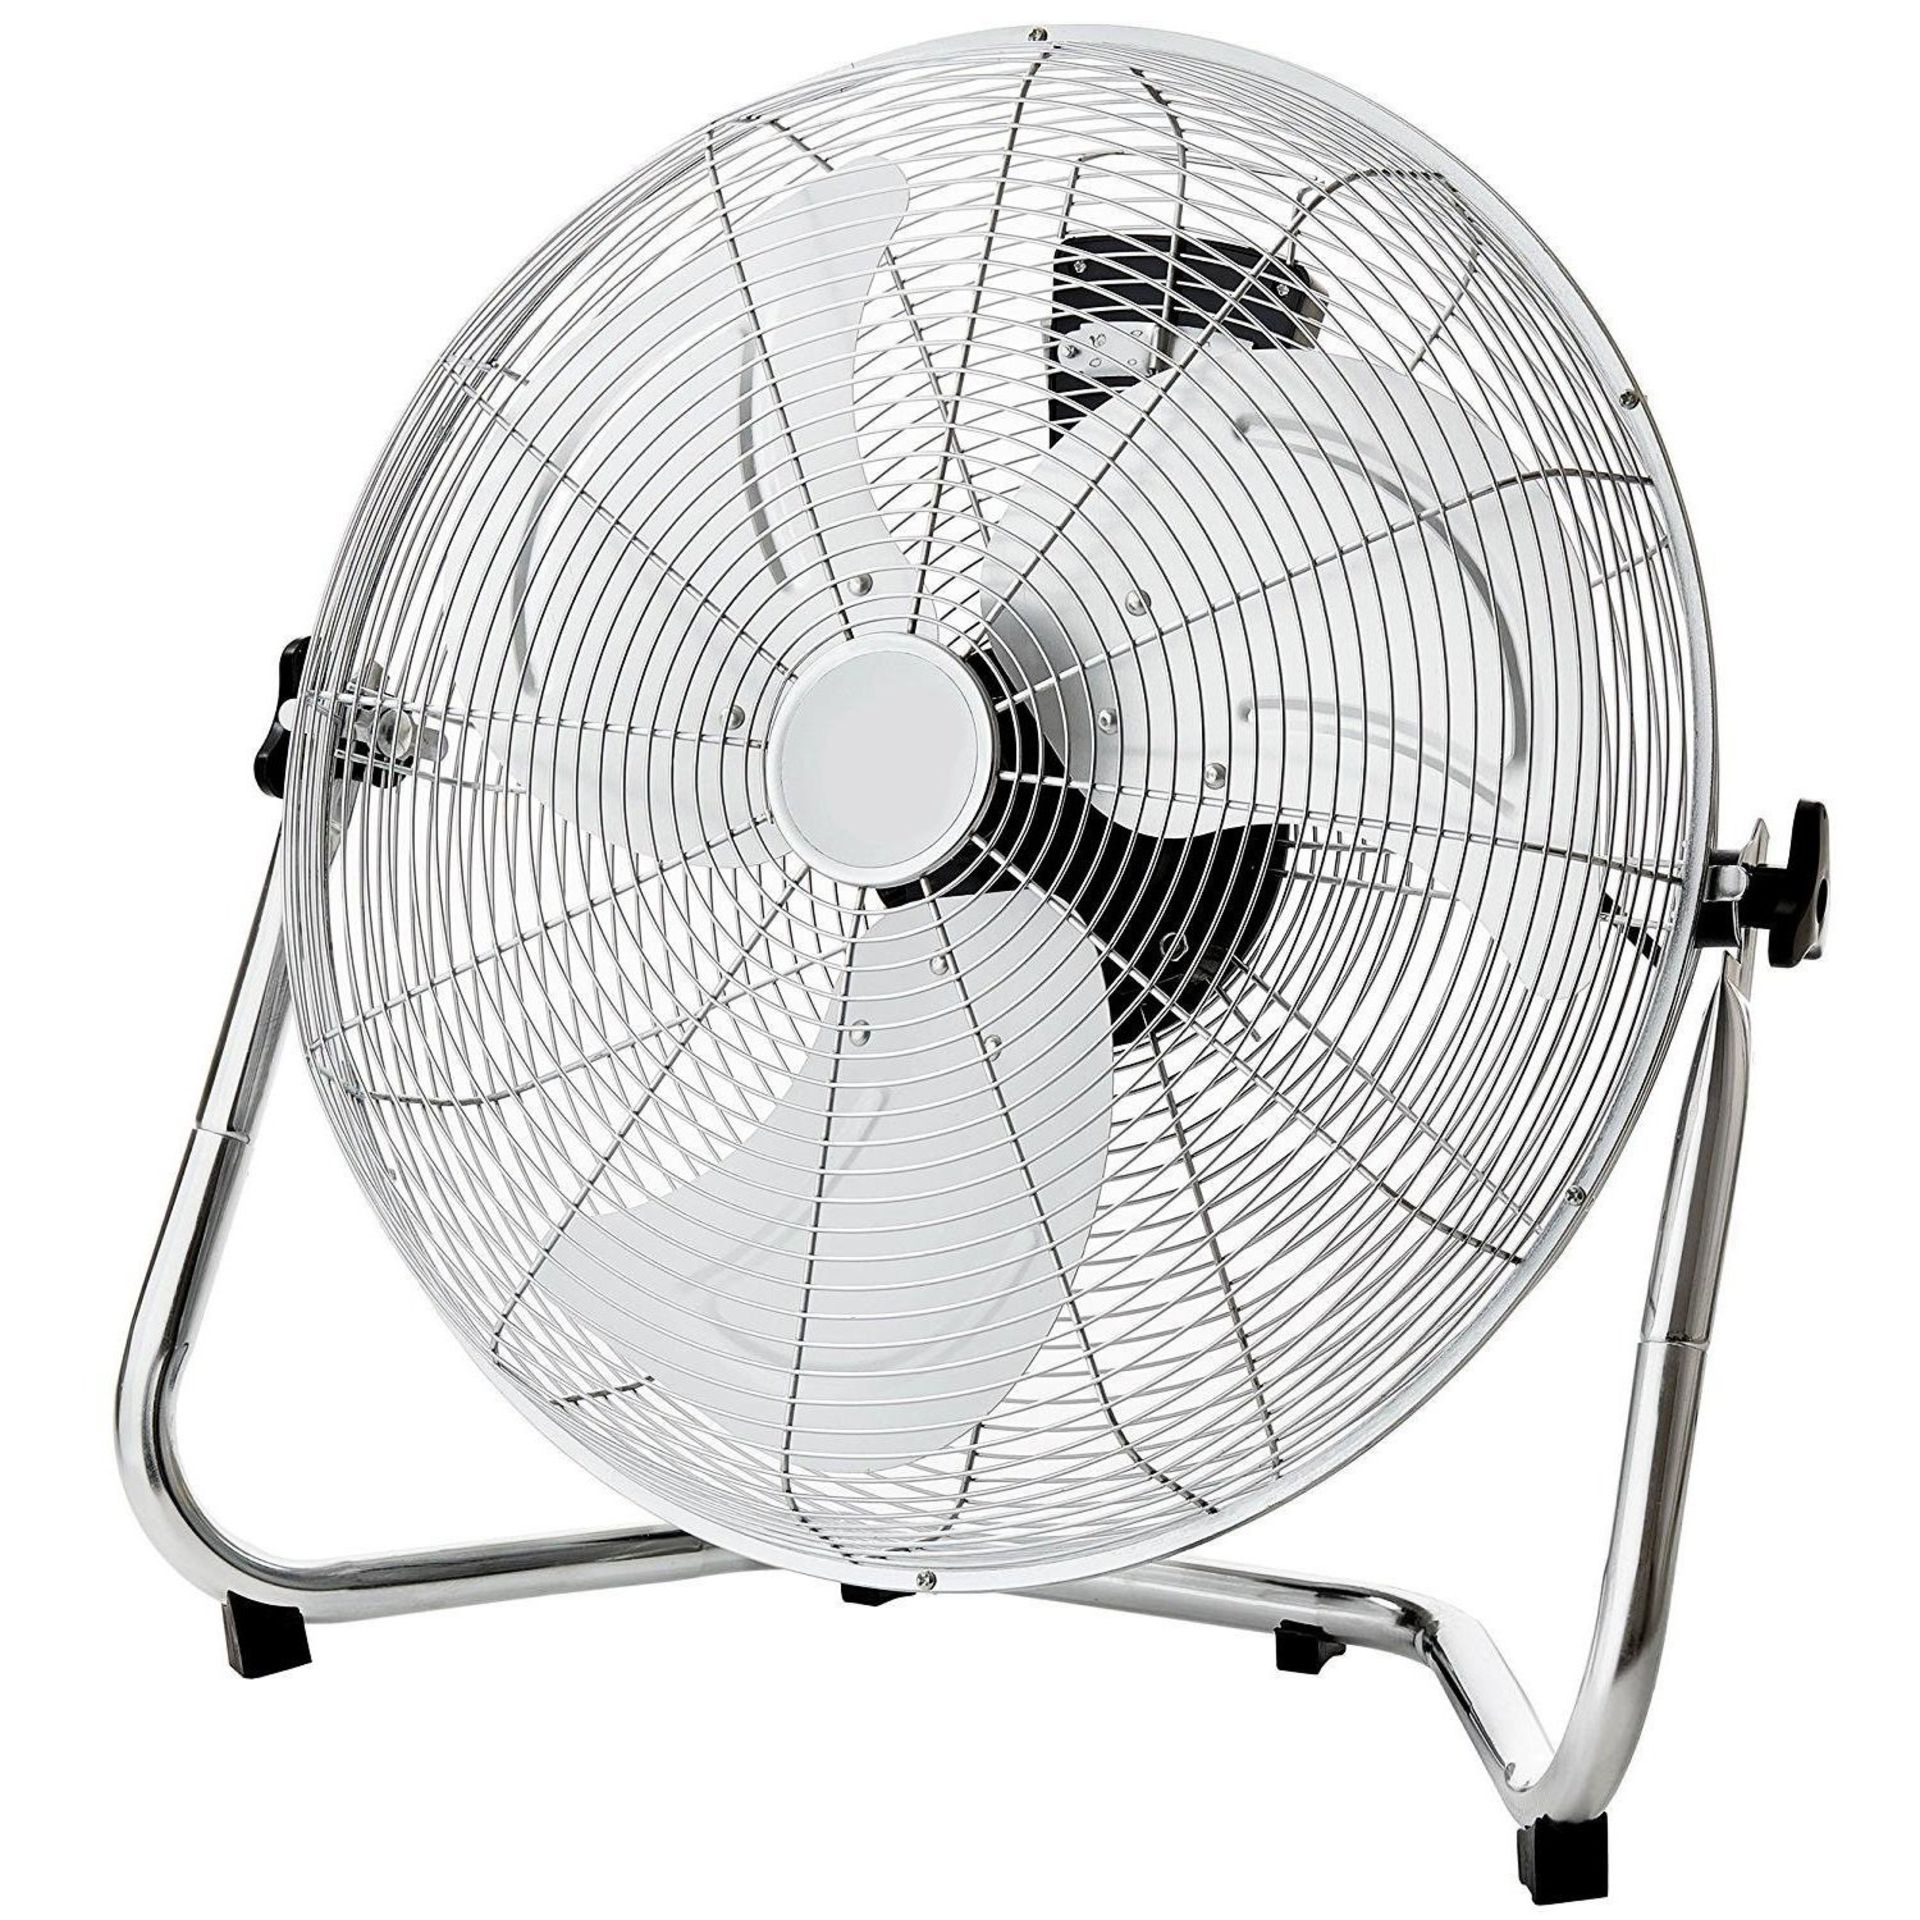 (G26) 18" Chrome 3 Speed Free Standing Gym Fan 3 Speed Push Button Speed Control Fixed Posi... - Image 2 of 3